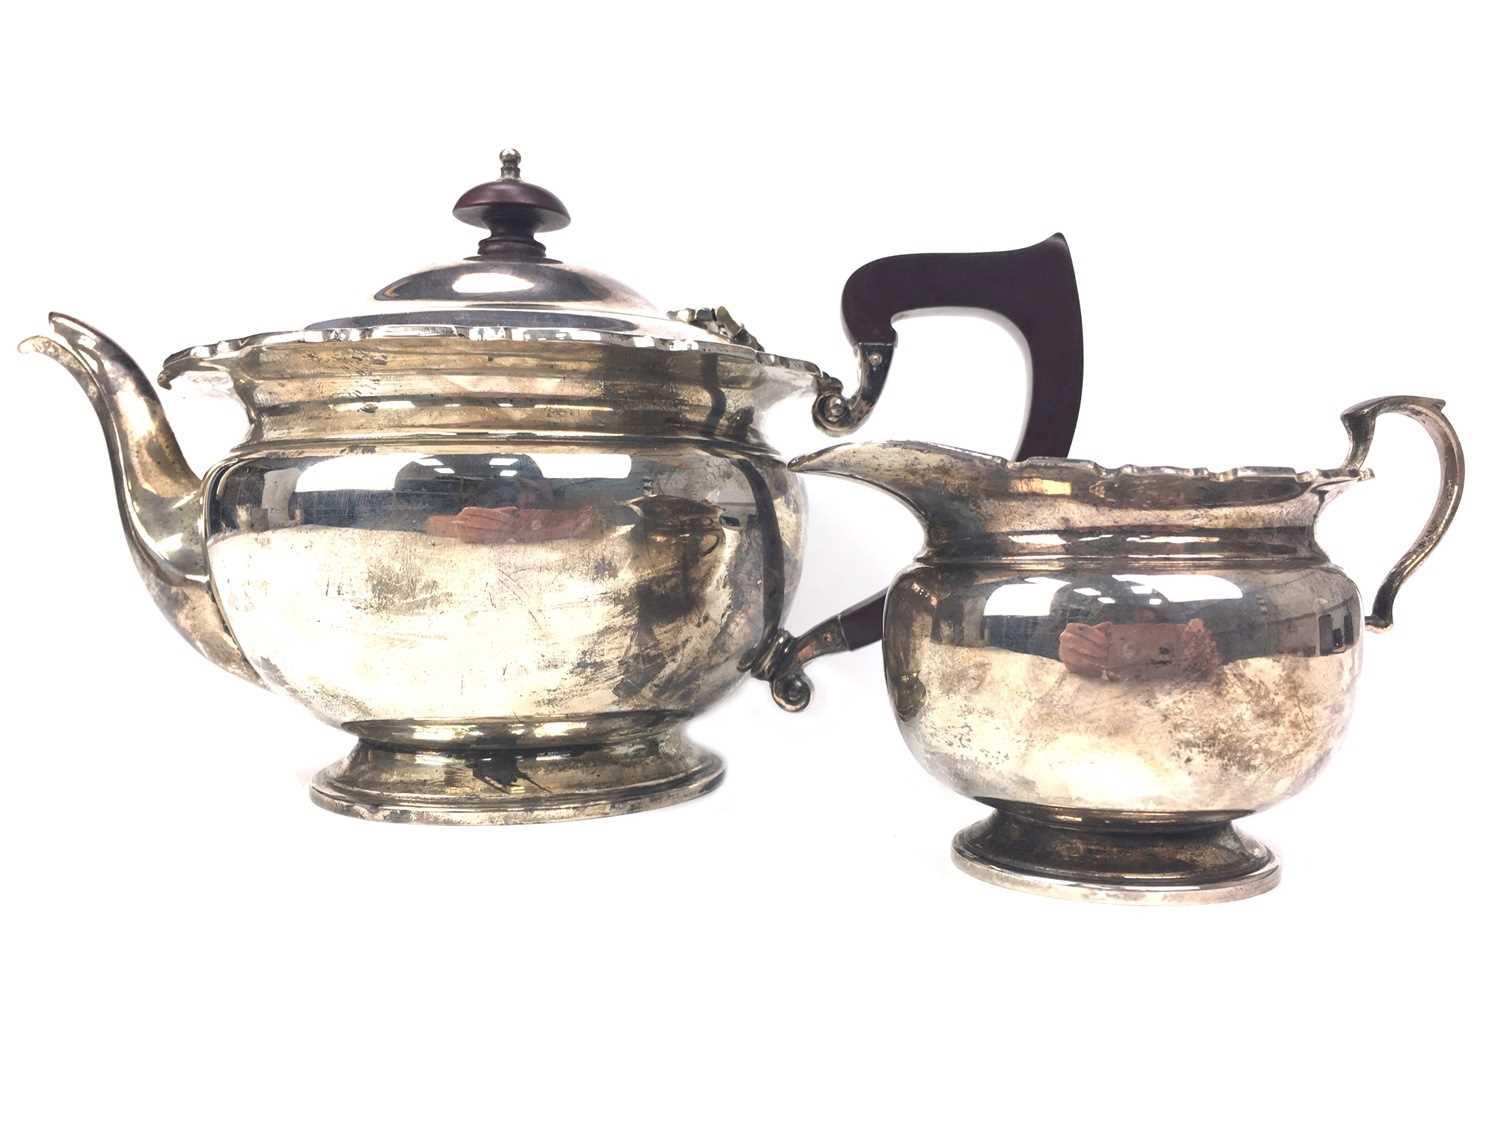 Lot 424 - AN EARLY 20TH CENTURY SILVER TEAPOT AND CREAMER